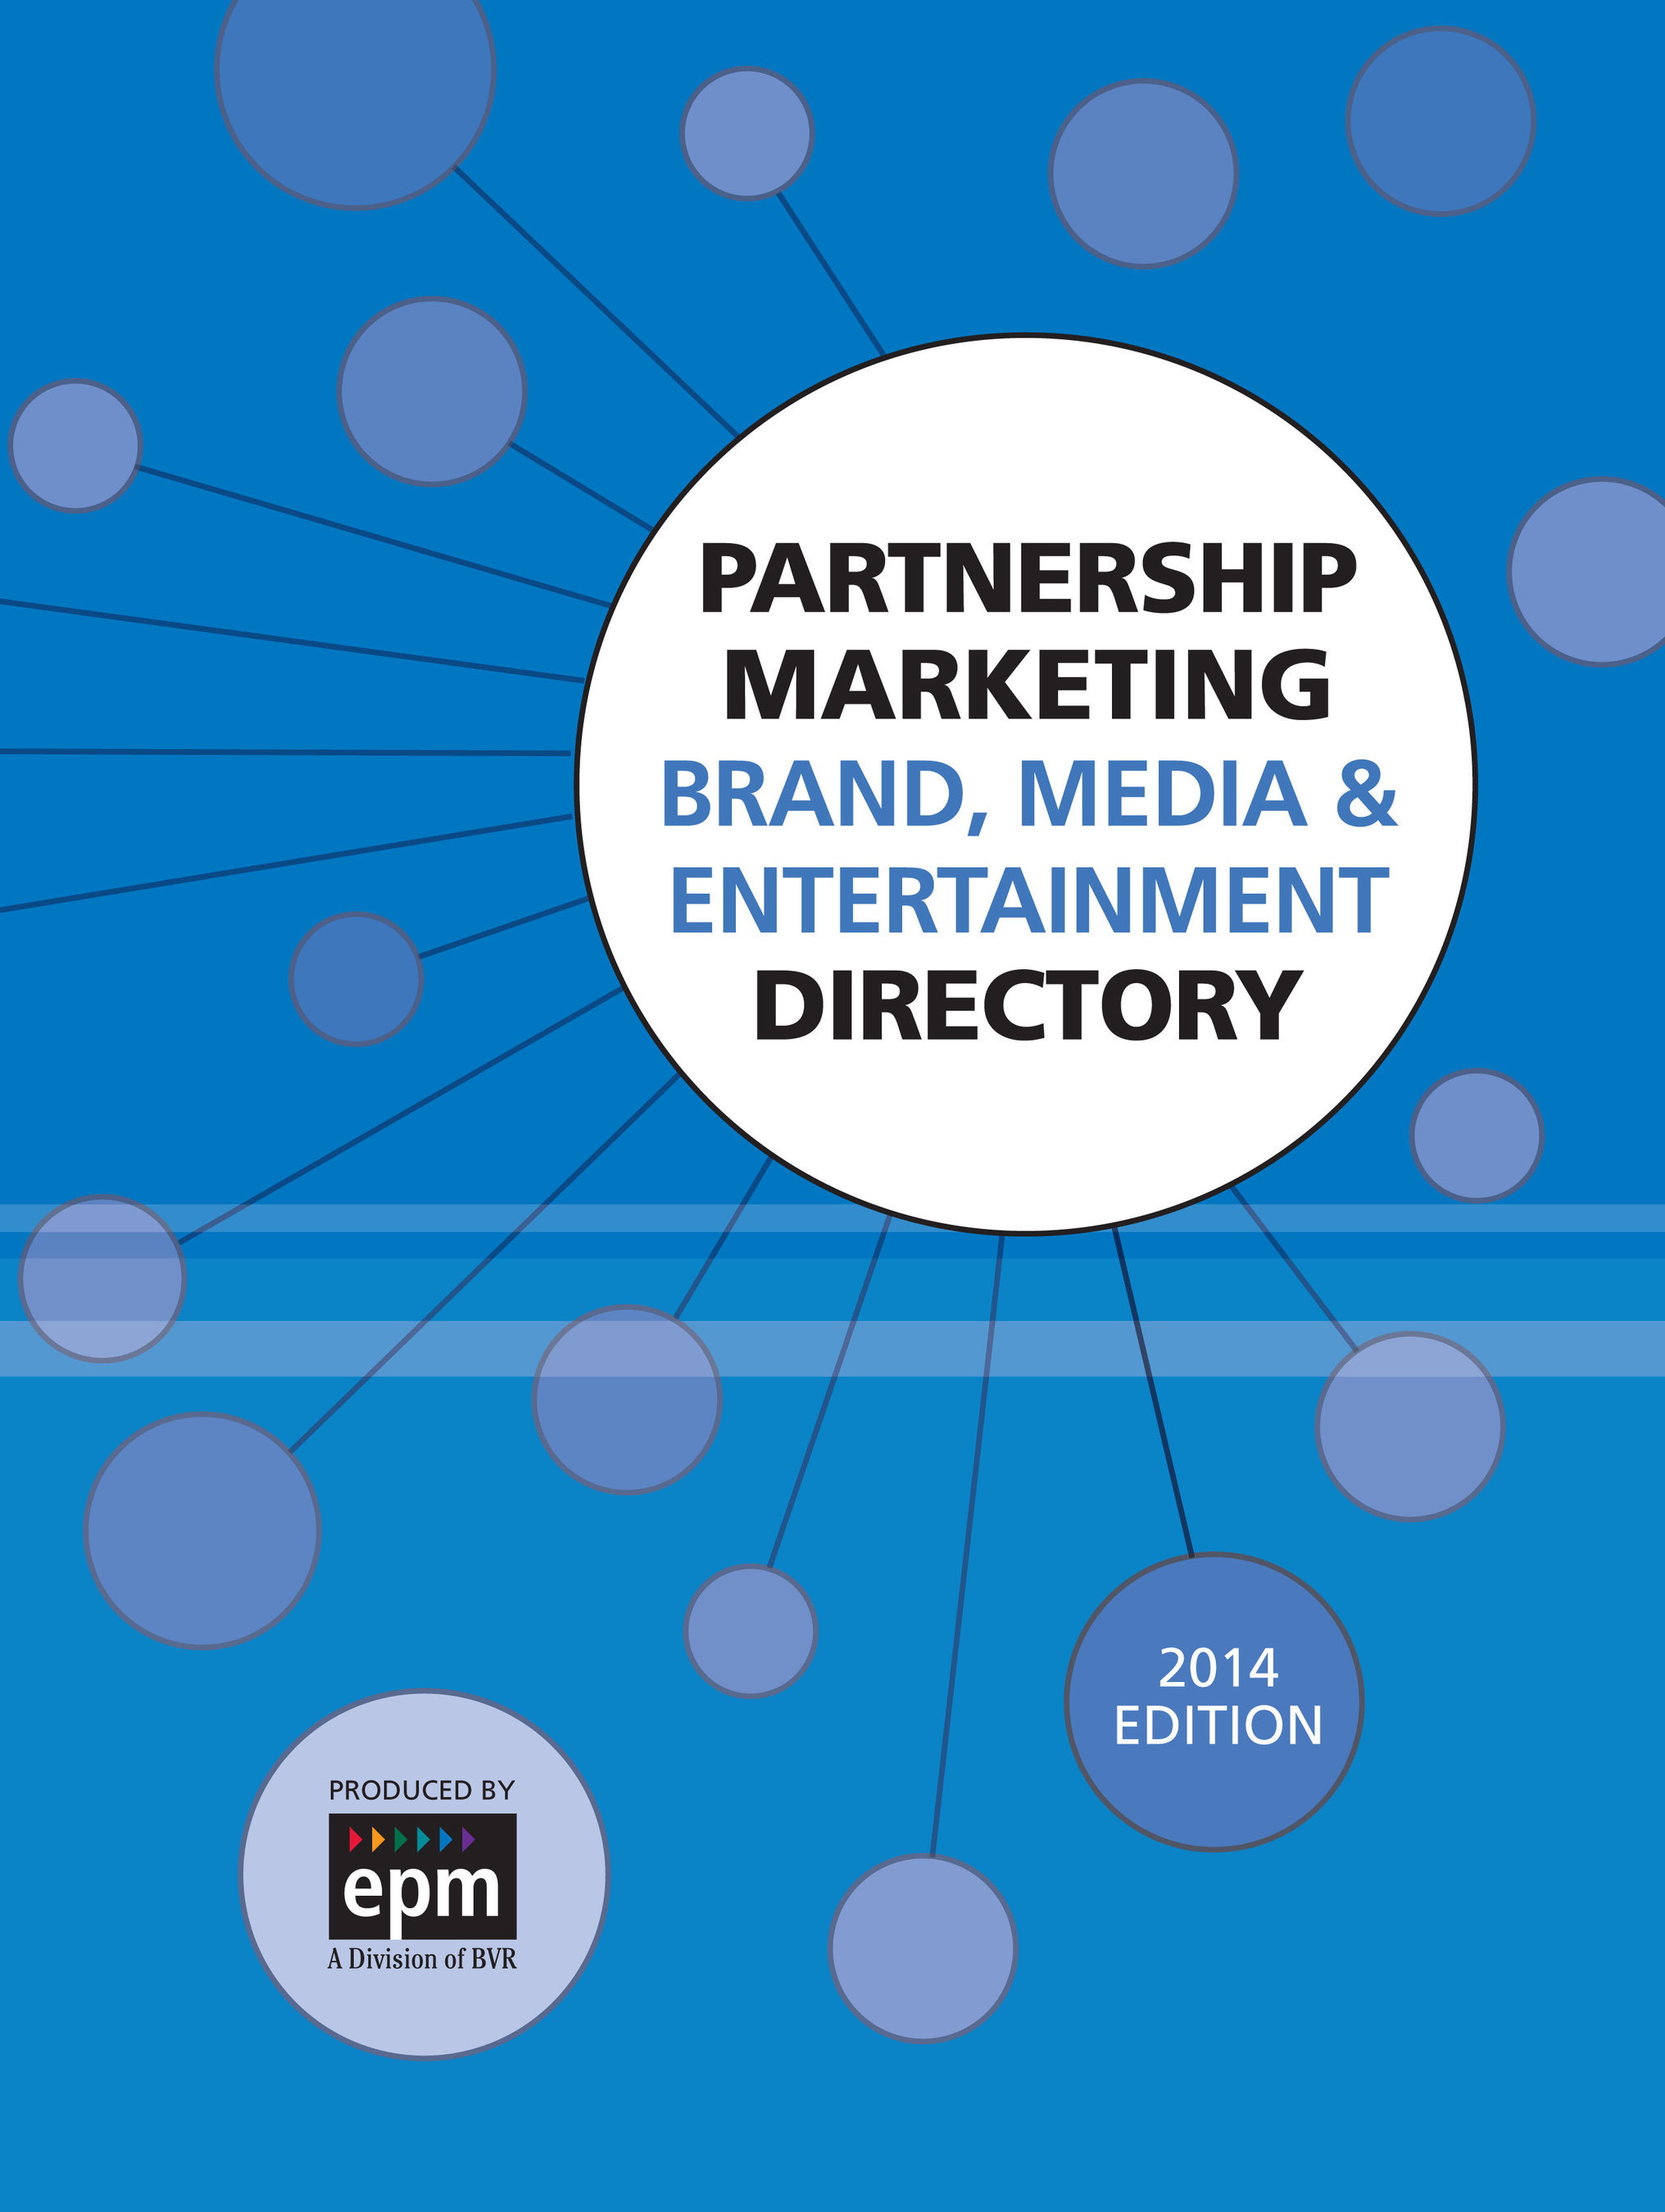 EPM introduces Partnership Marketing Brand, Media and Entertainment Directory. (PRNewsFoto/Business Valuation Resources)